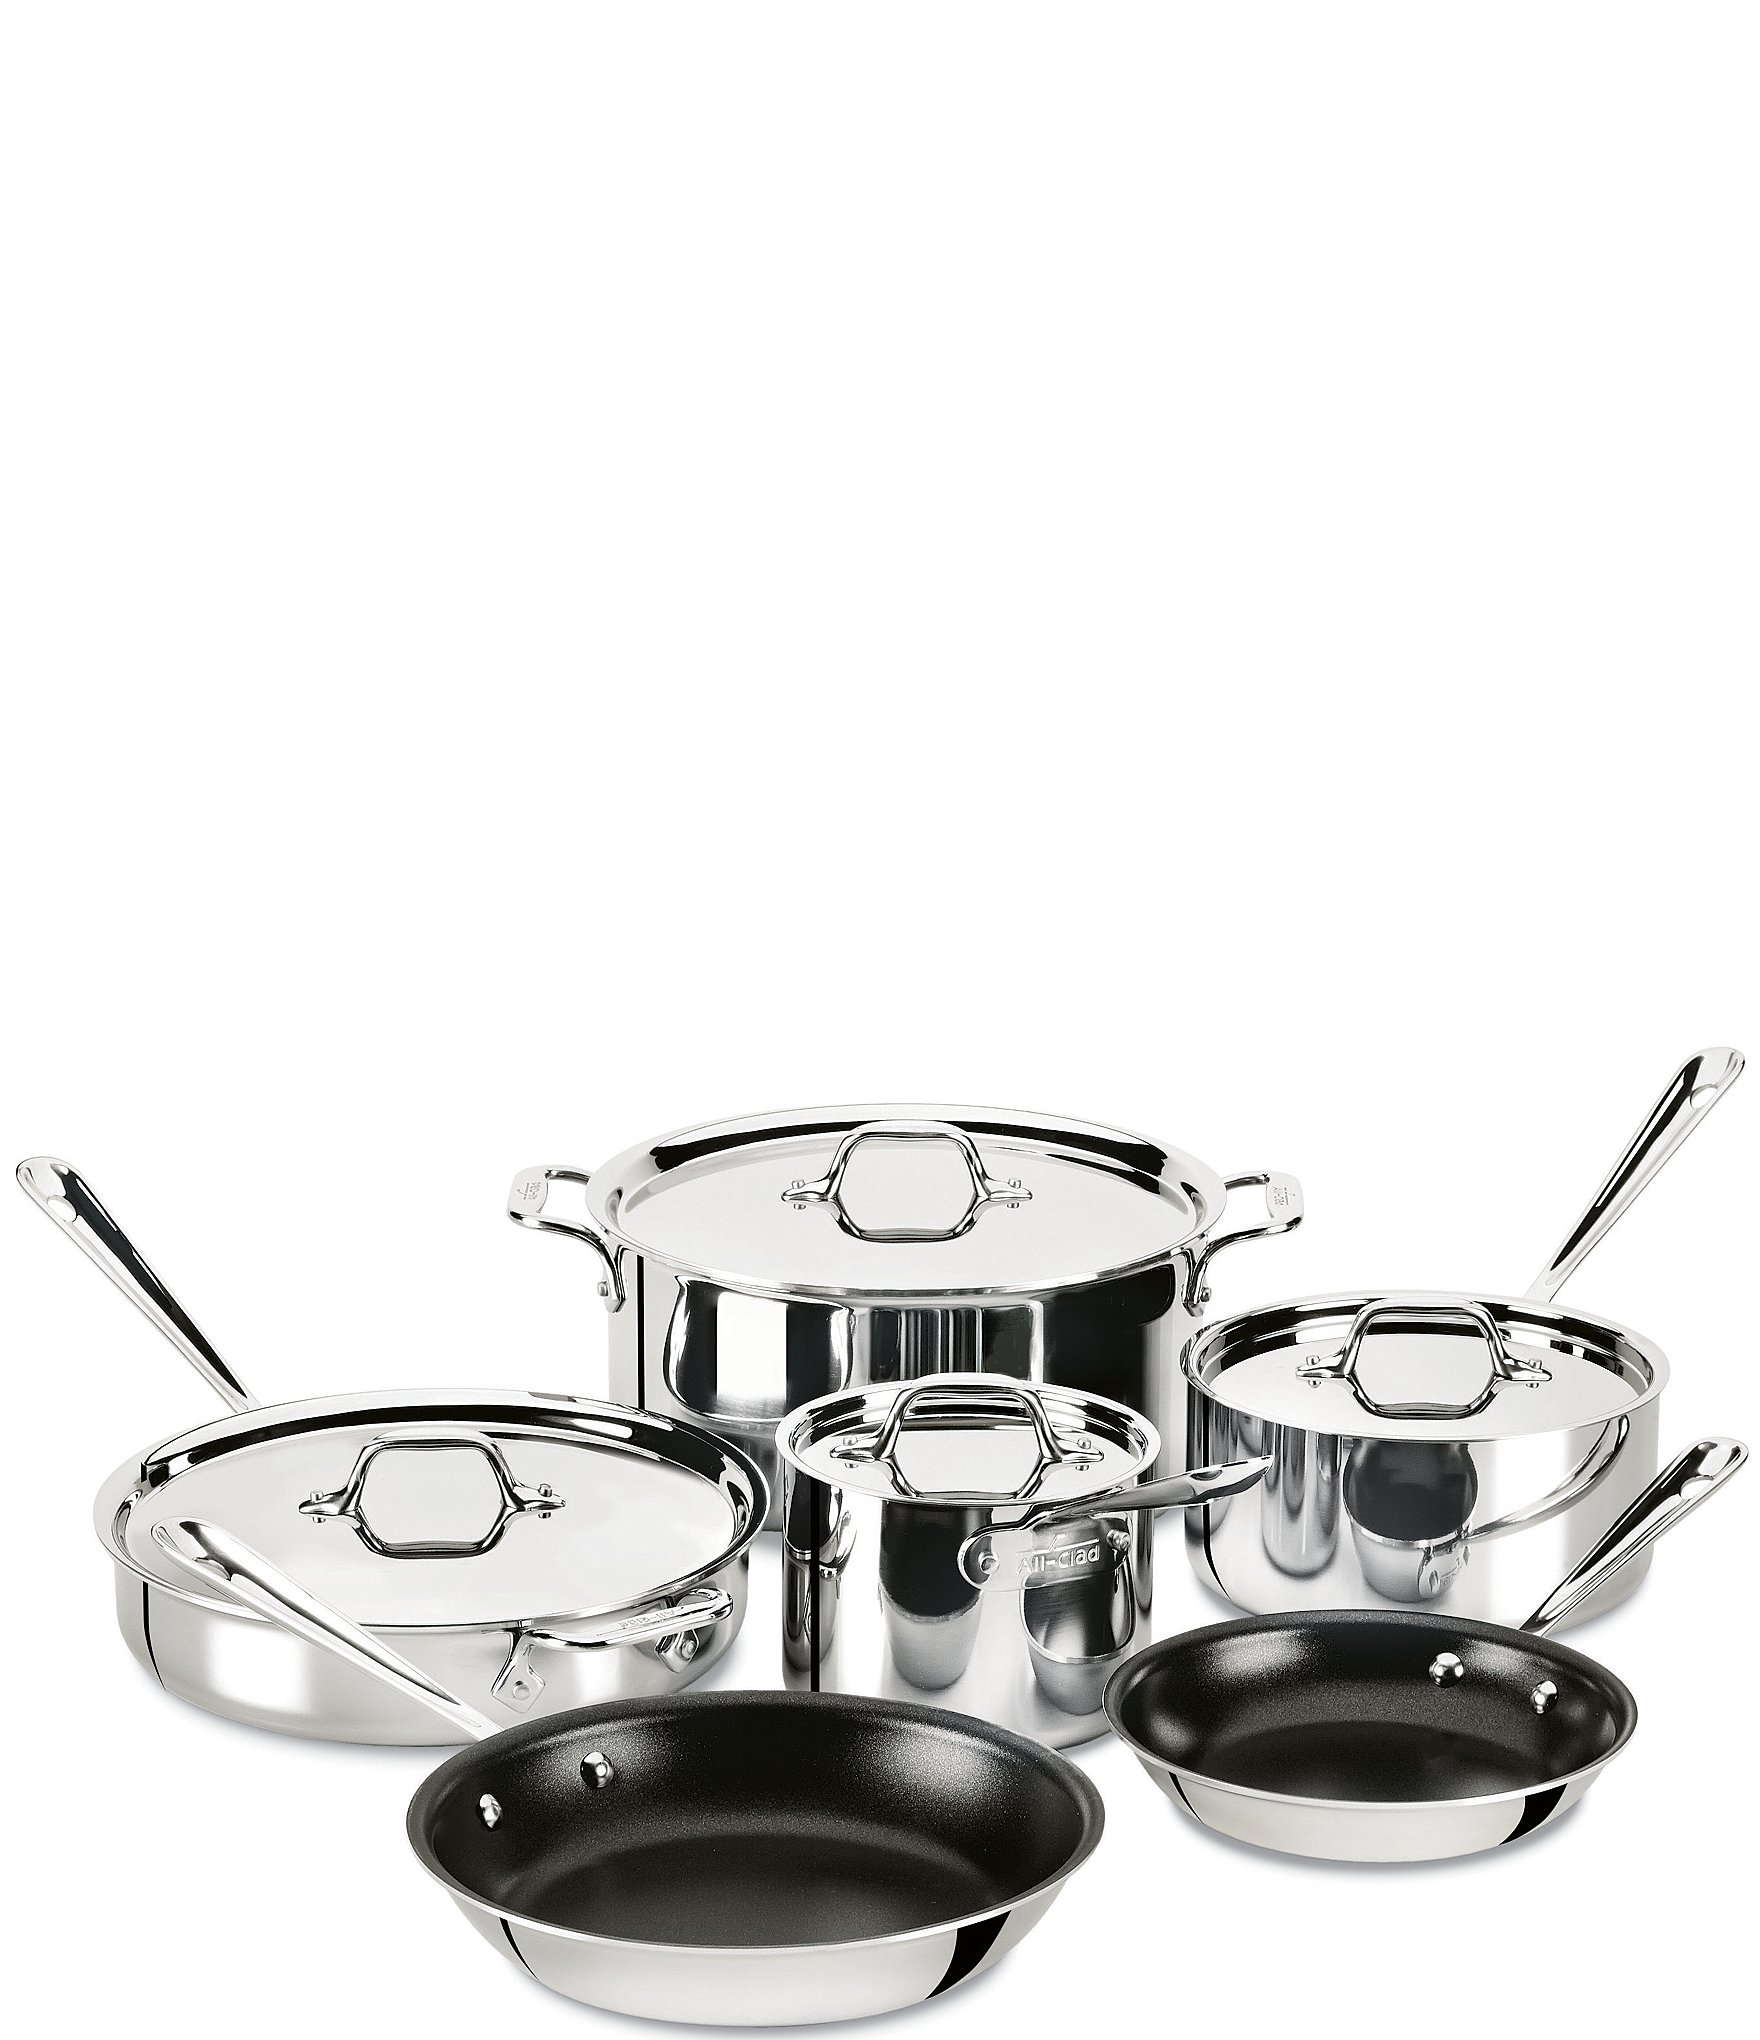 All-Clad D3 Stainless 3-Ply Bonded Cookware Set, Nonstick 10-Piece Set